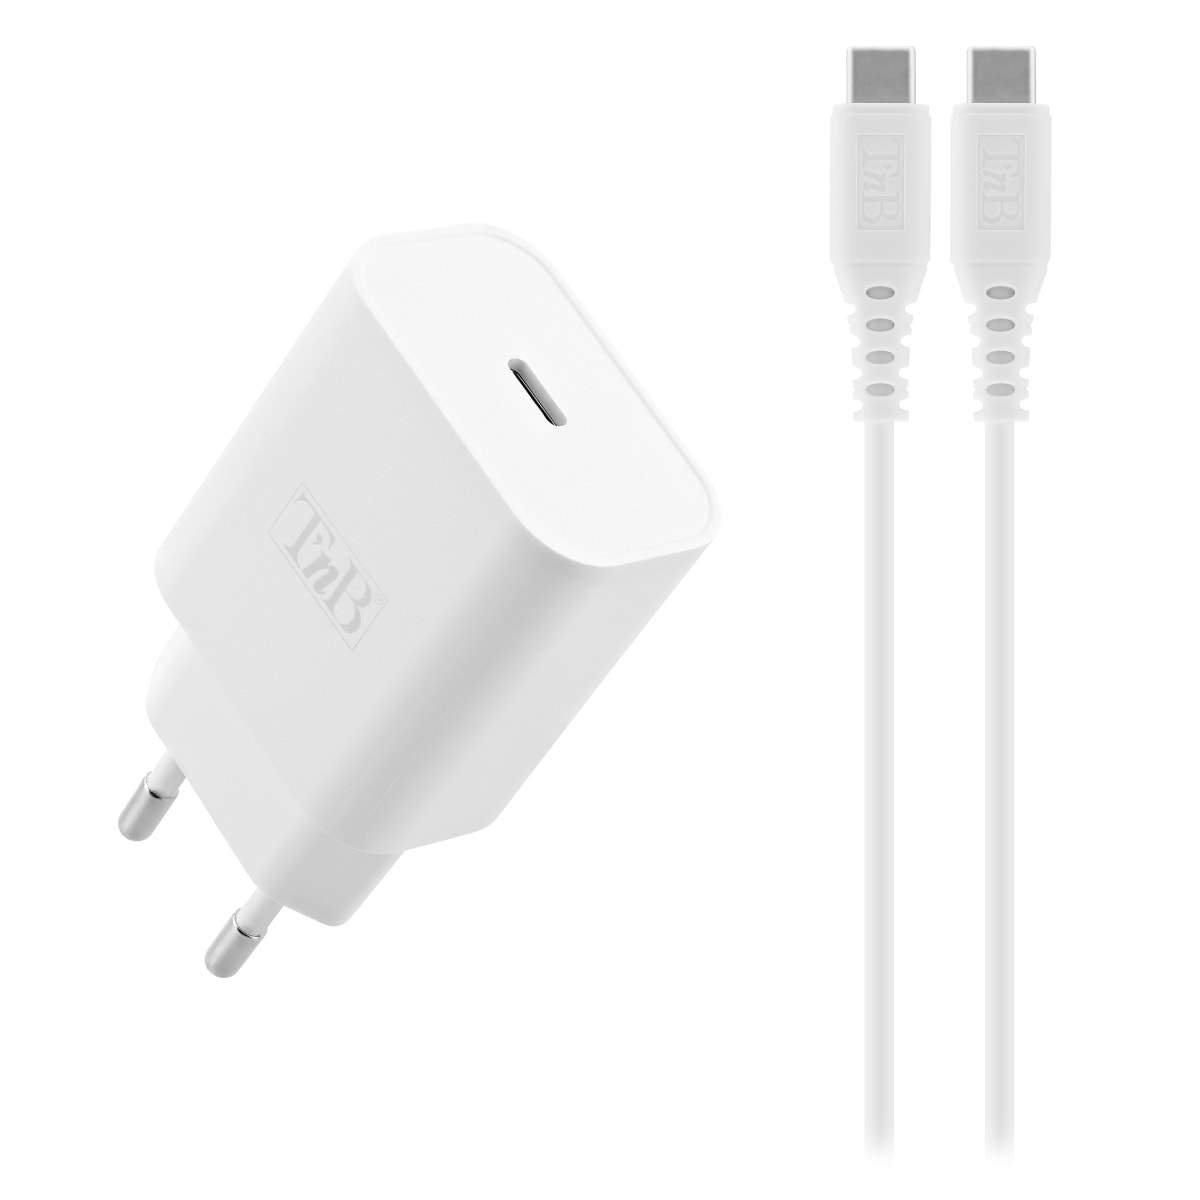 1 USB-C Power Delivery 20W wall charger + USB-C Power Delivery cable